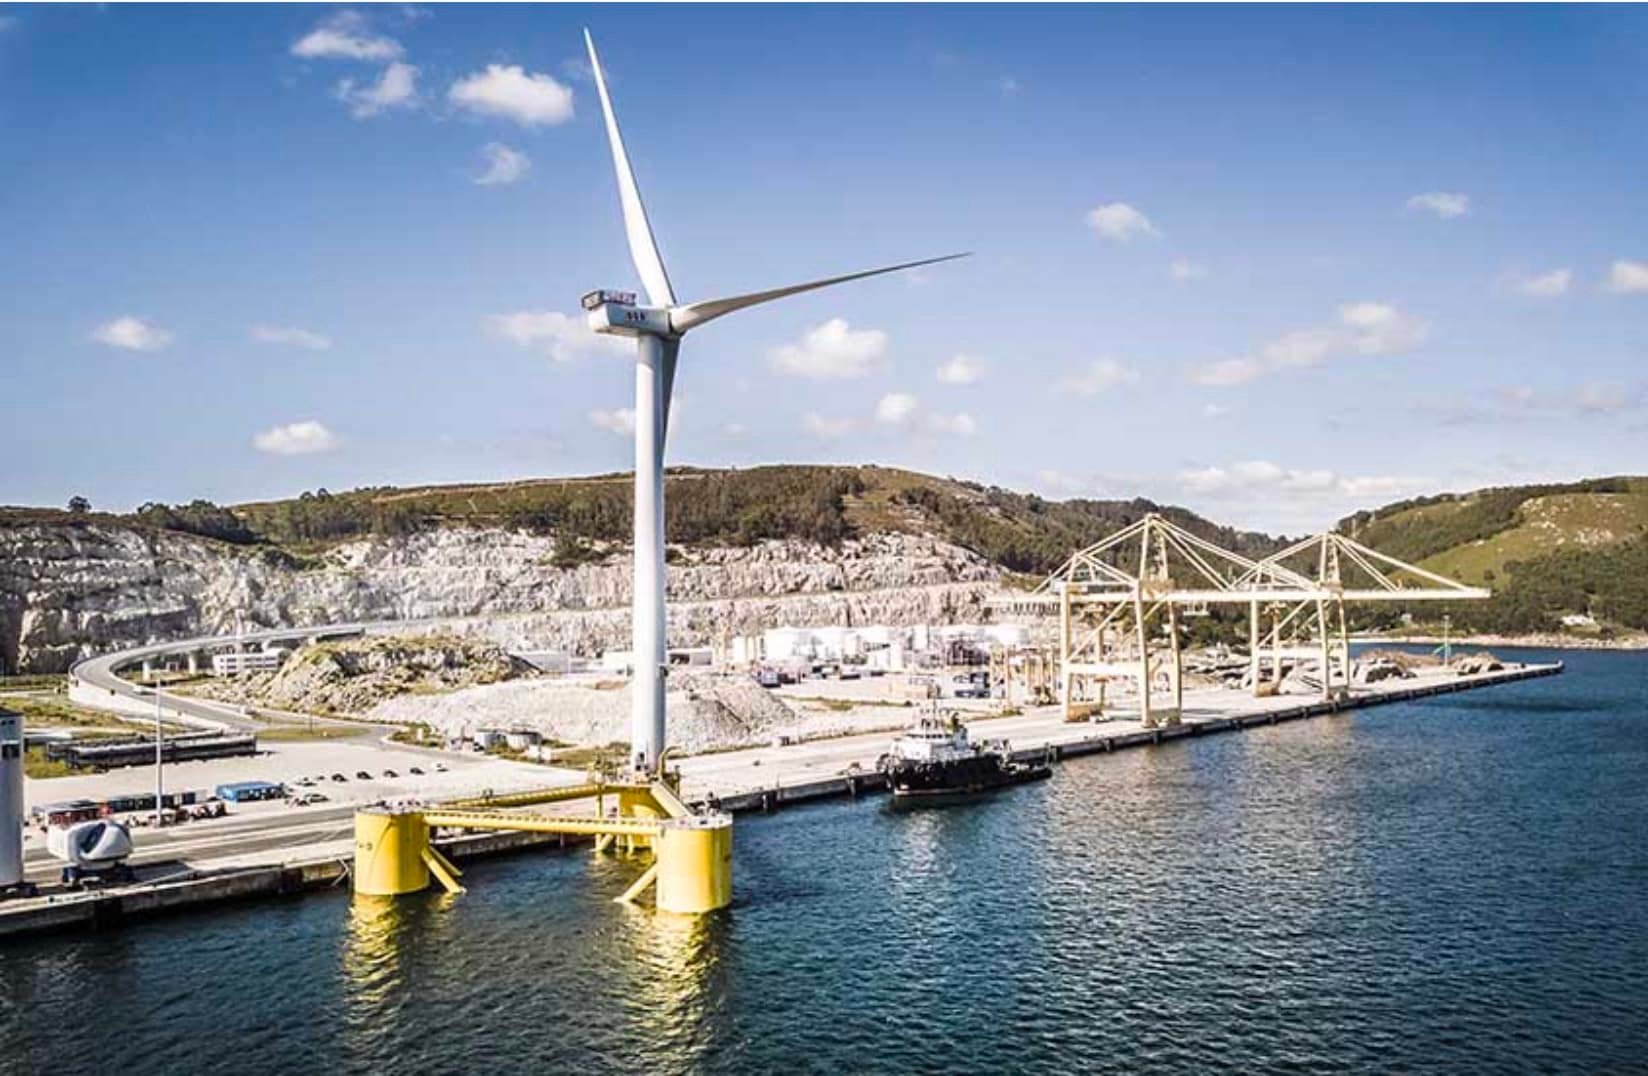 Old lumber port preps for new life as California offshore wind hub |  Courthouse News Service